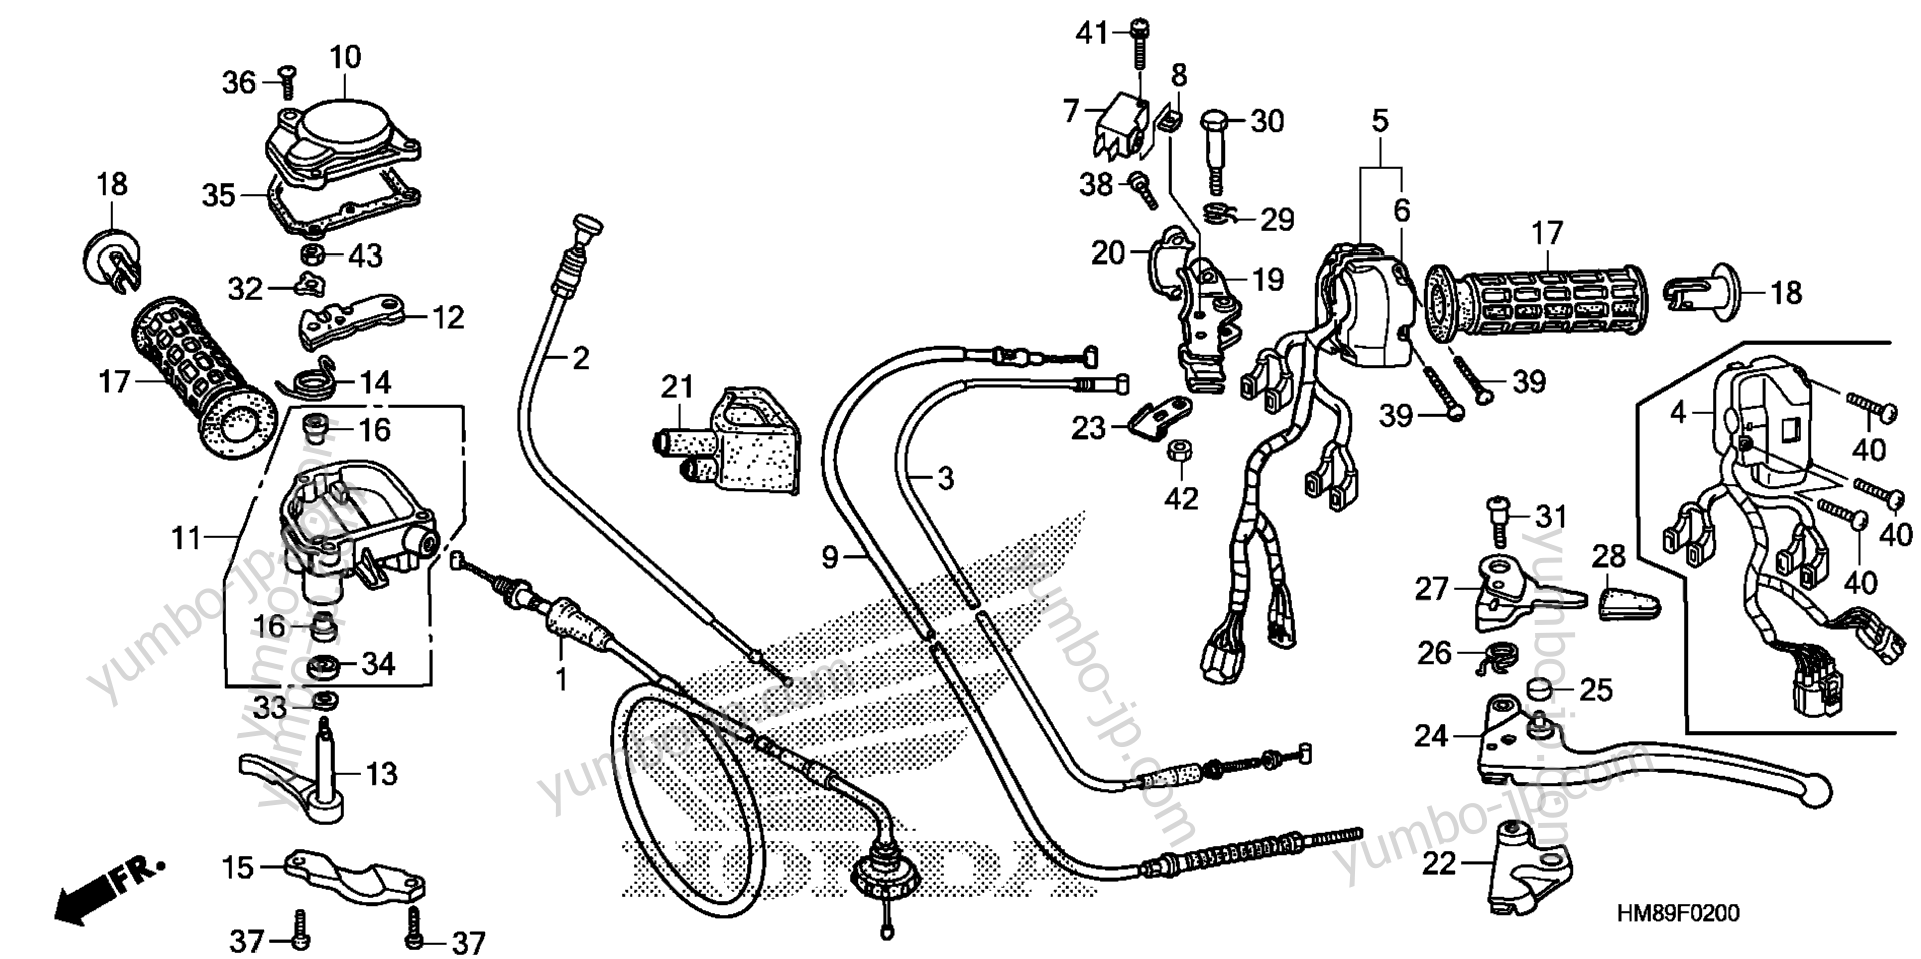 HANDLE LEVER / SWITCH / CABLE for ATVs HONDA TRX250TE A 2011 year